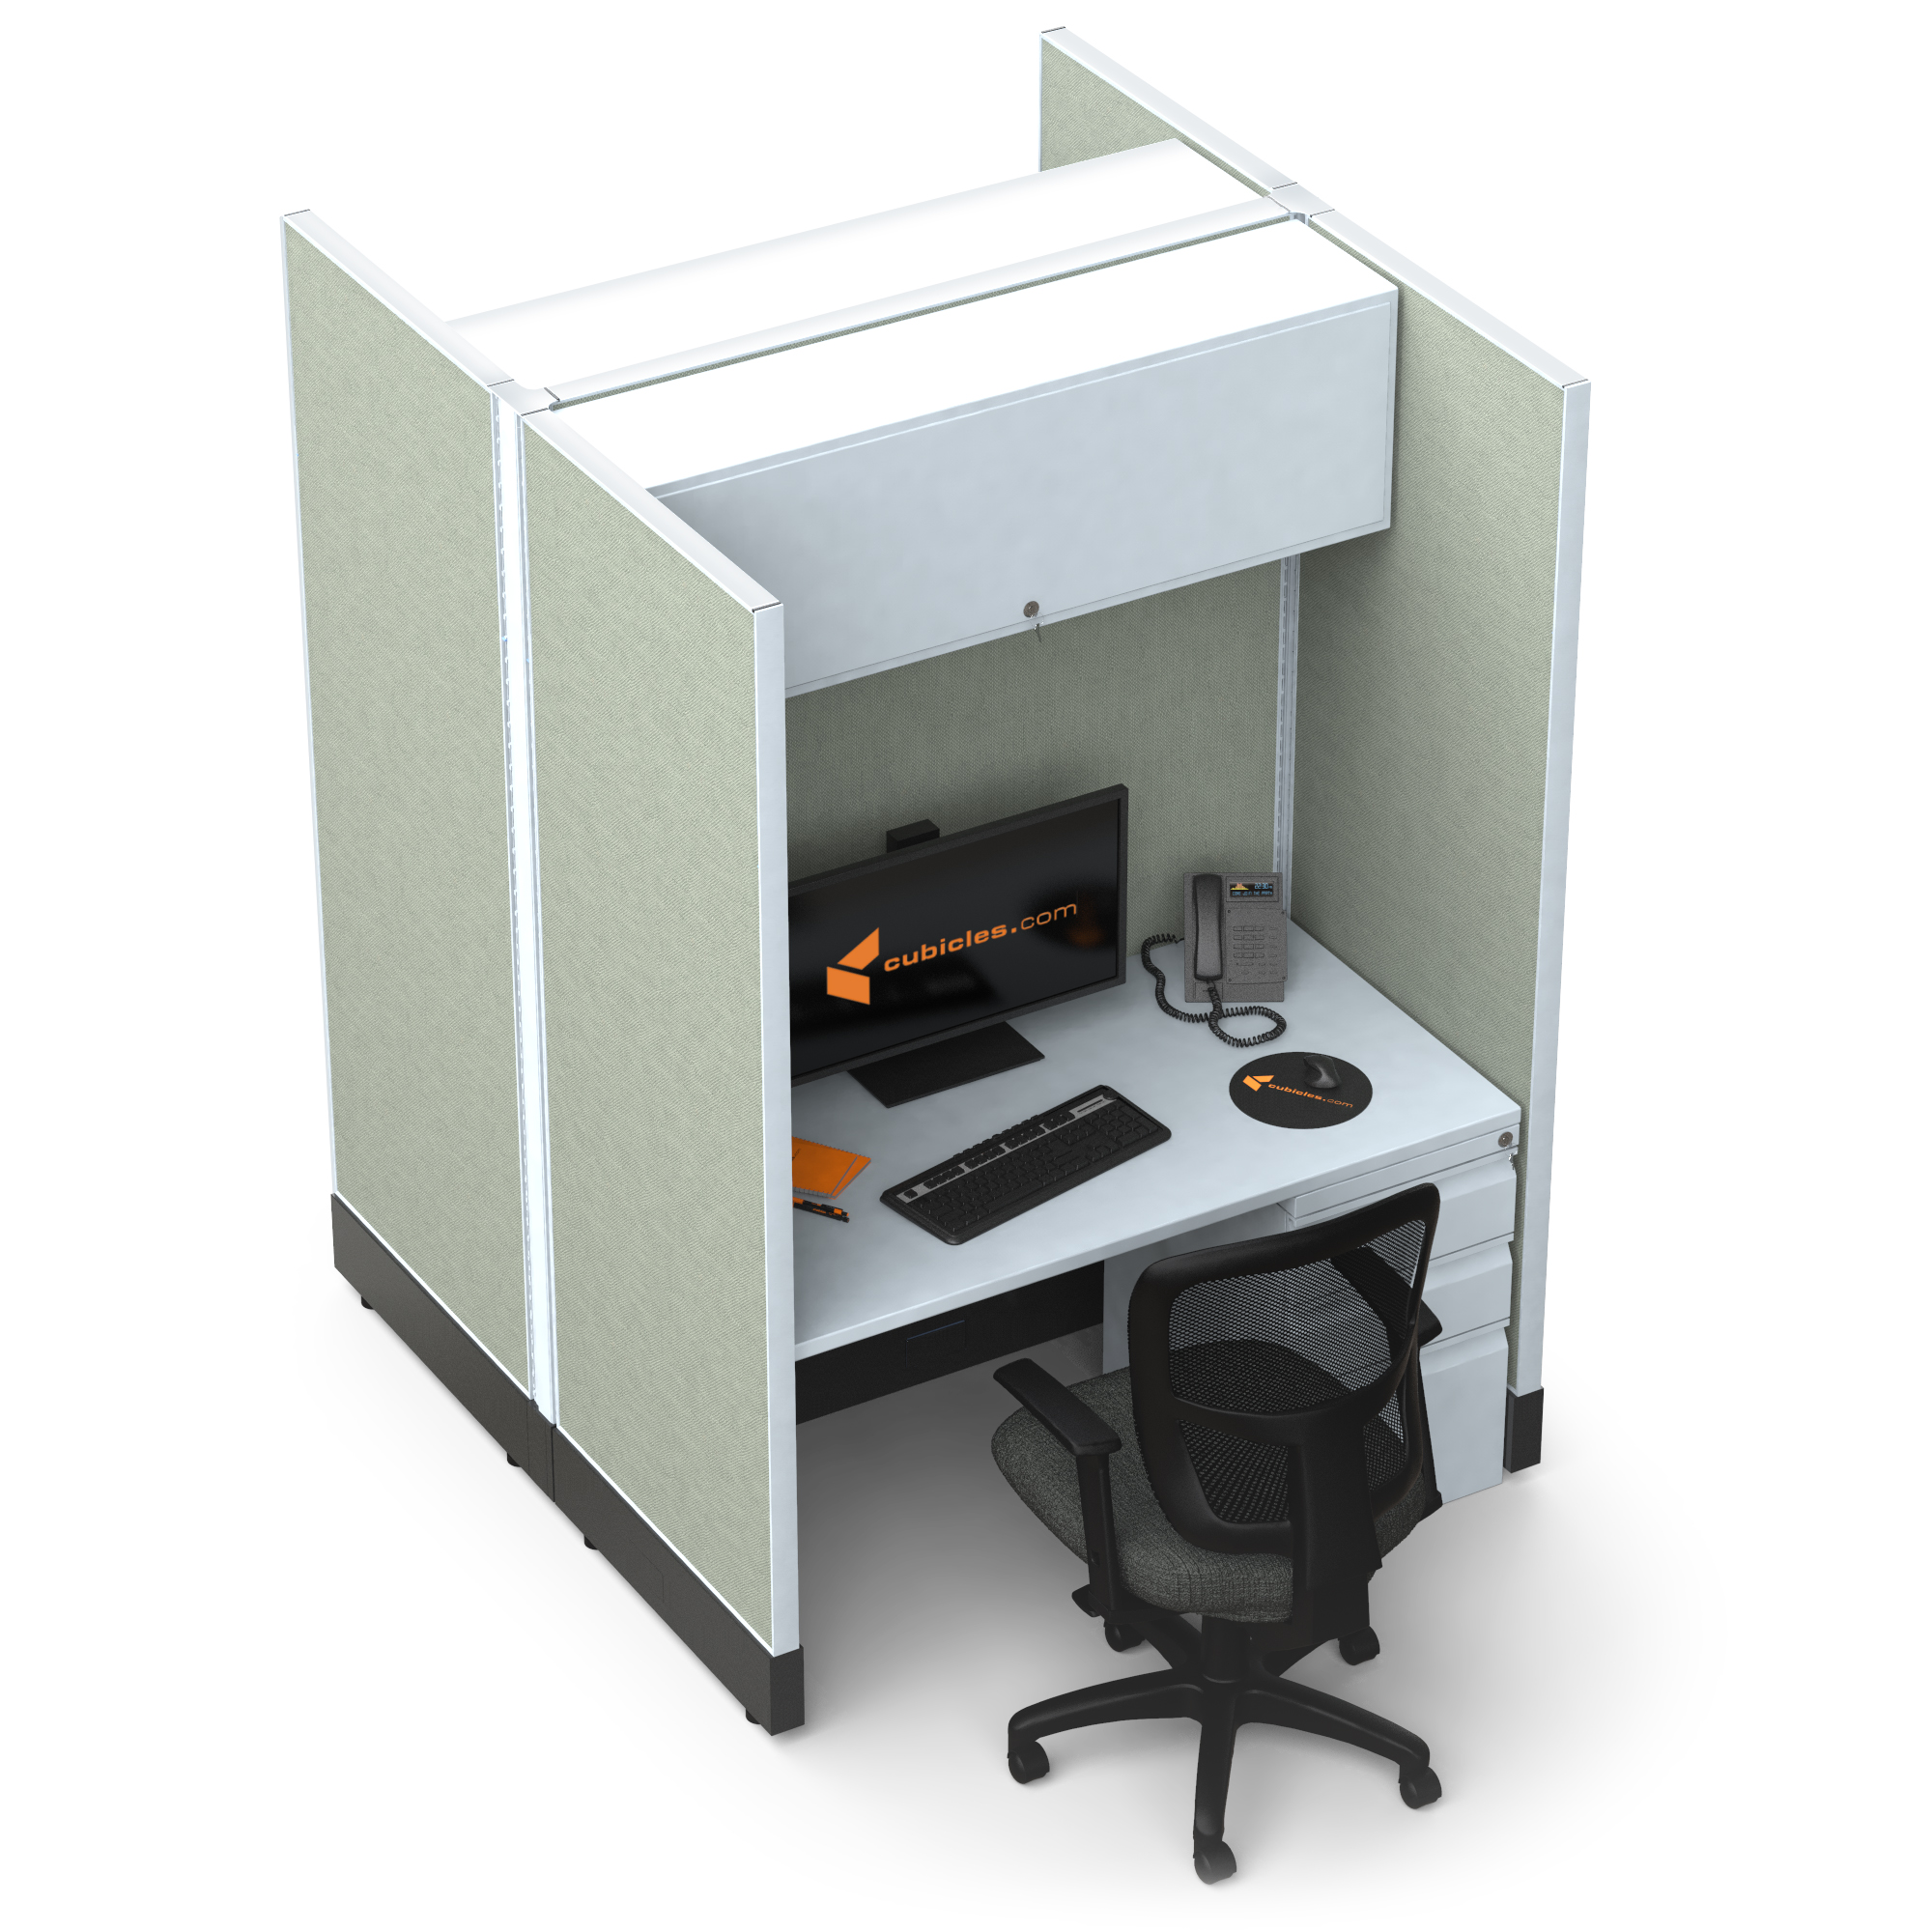 Hot desking hoteling stations 2c pack powered